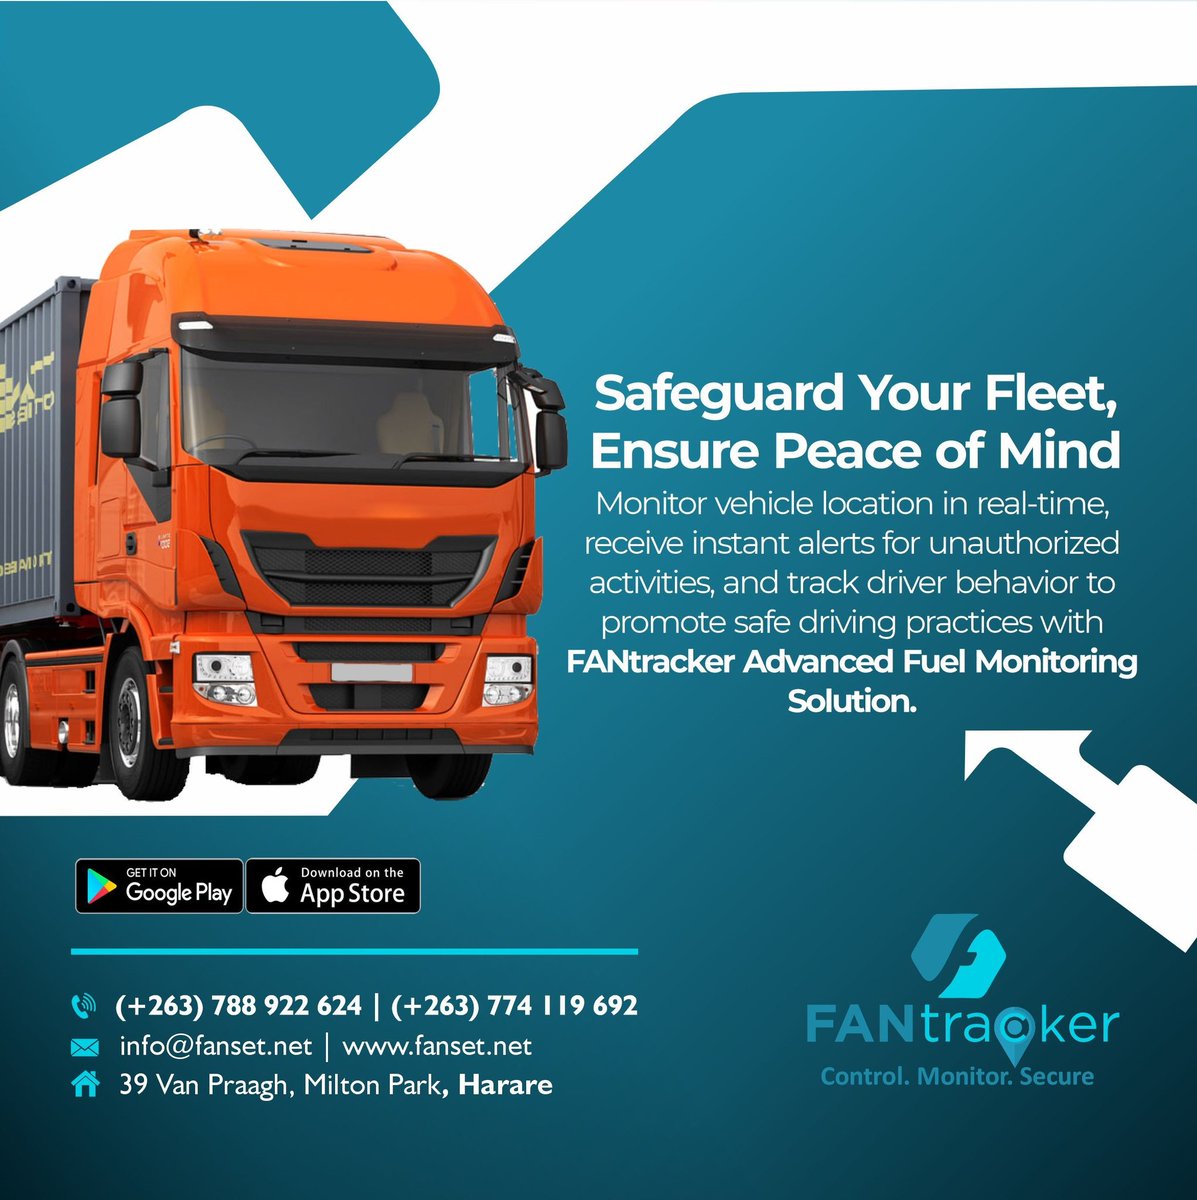 Enhance Control and Accountability with FANtracker Advanced Fuel Monitoring Solution for Your Fleet. Choose our system to secure your assets and protect your bottom line now. Contact FANtracker on +263778179409/ 0774119692 #FANtracker #FuelMonitoring #Vehicletracking